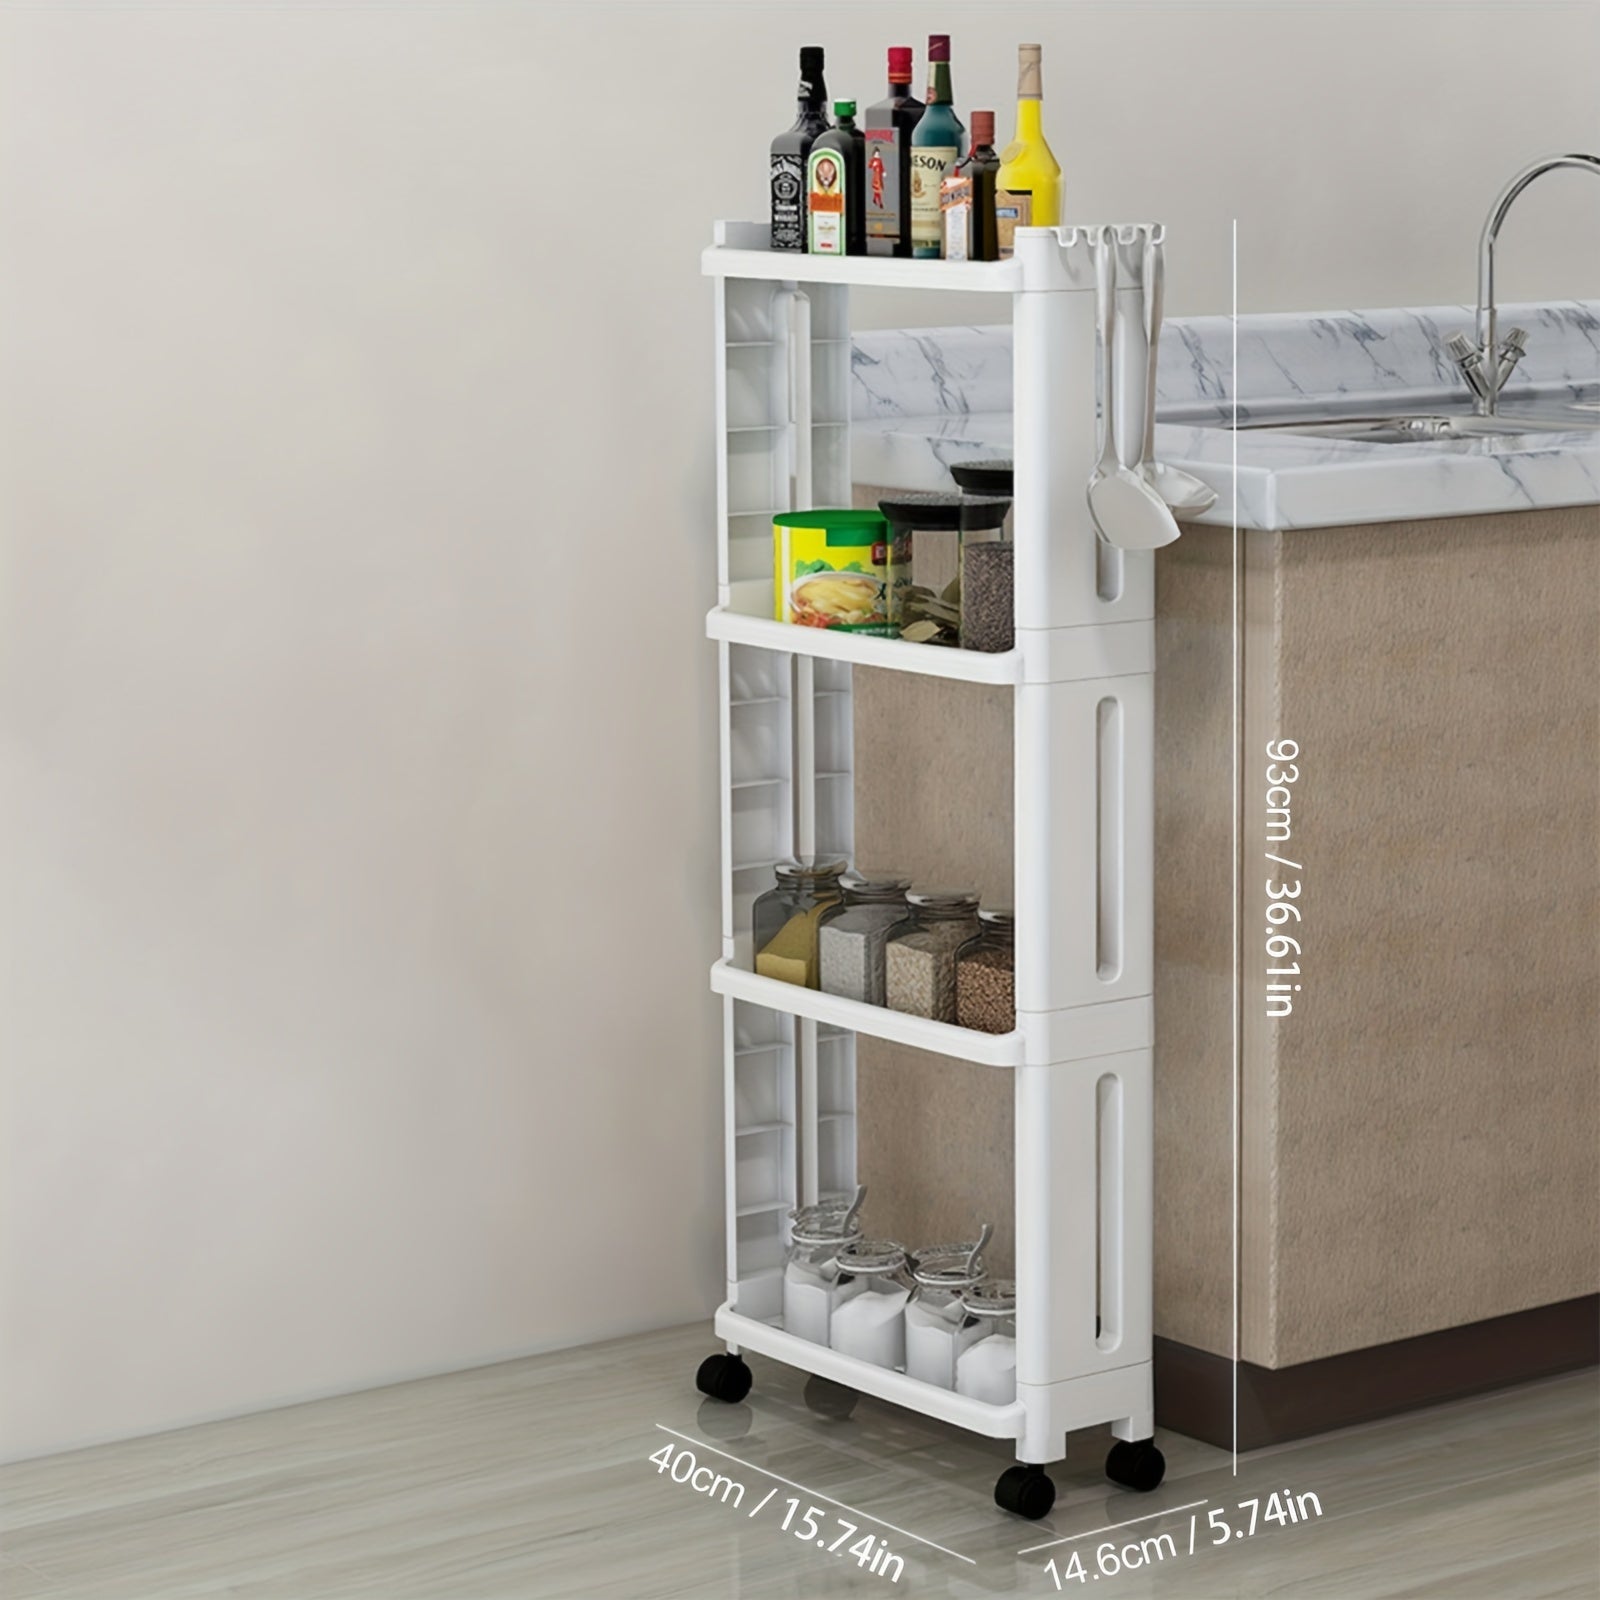 VENETIO Maximize Your Storage Space with this Slim, Multi-Layer, Movable Storage Cart! ➡ SO-00027